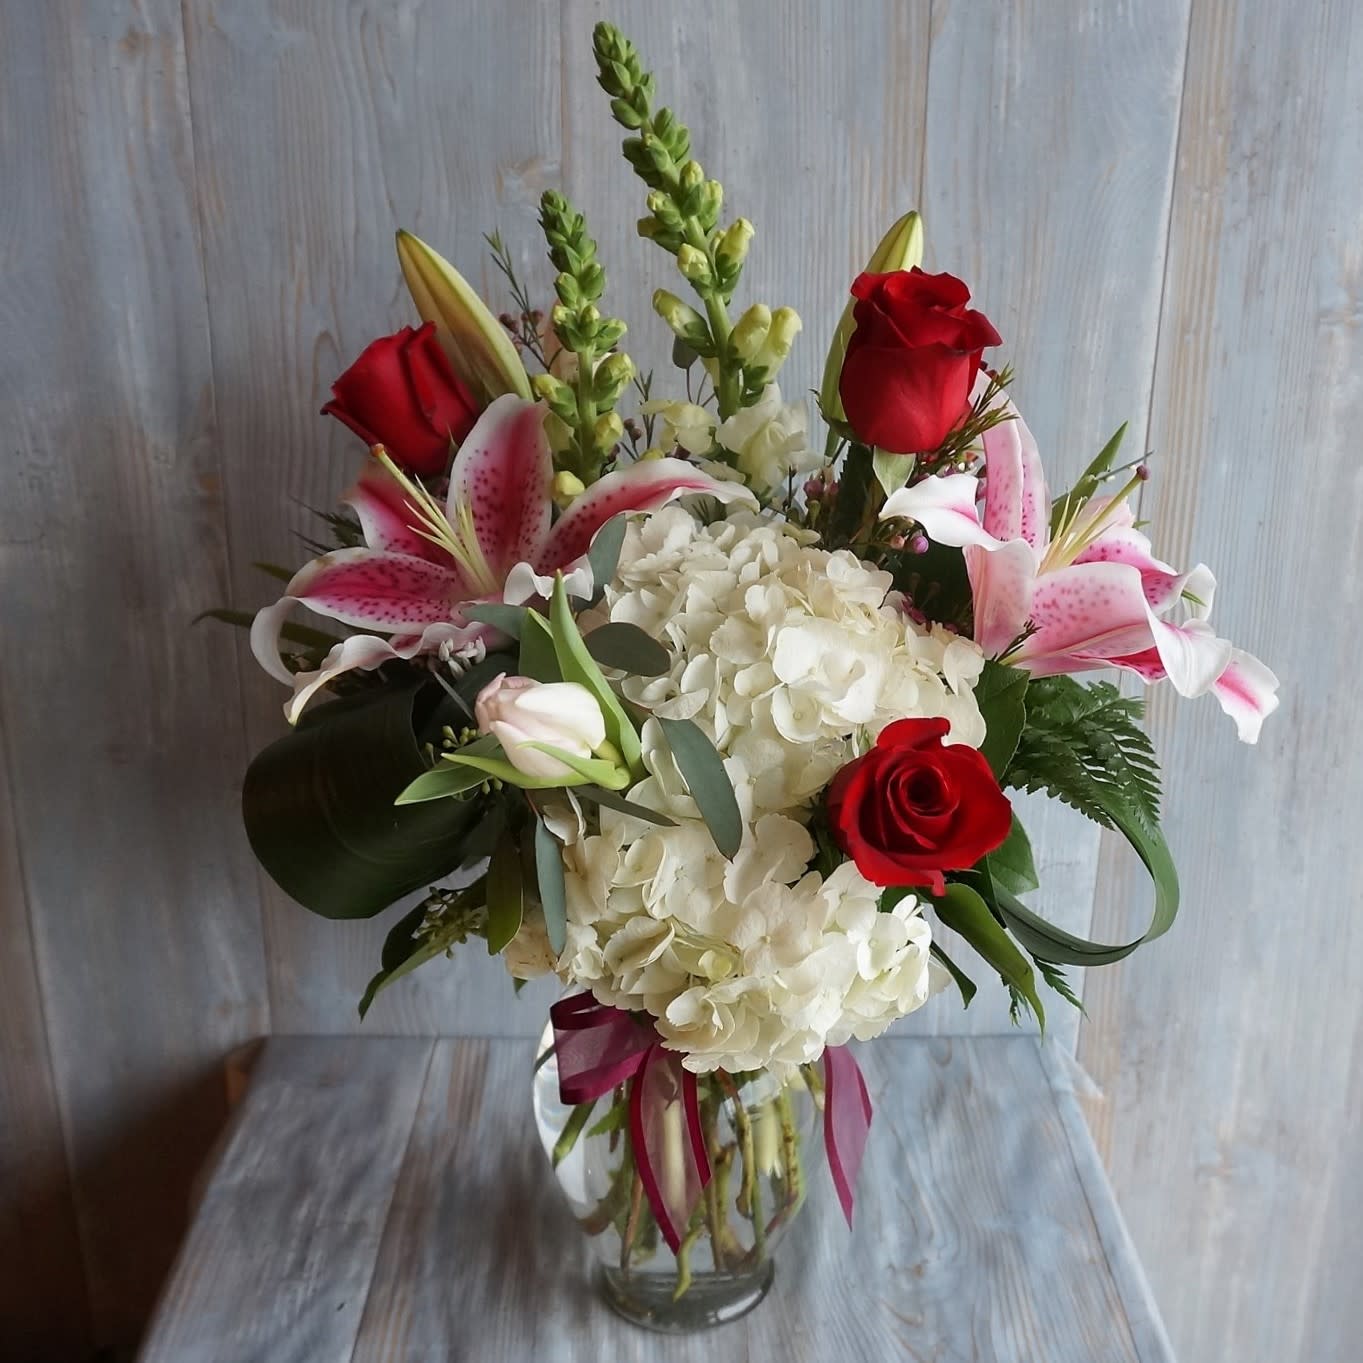 Love is in the Air - Vase arrangement of white hydrangea, snap dragons, Ecuadorian red roses, tulips and stargazer lilies. 